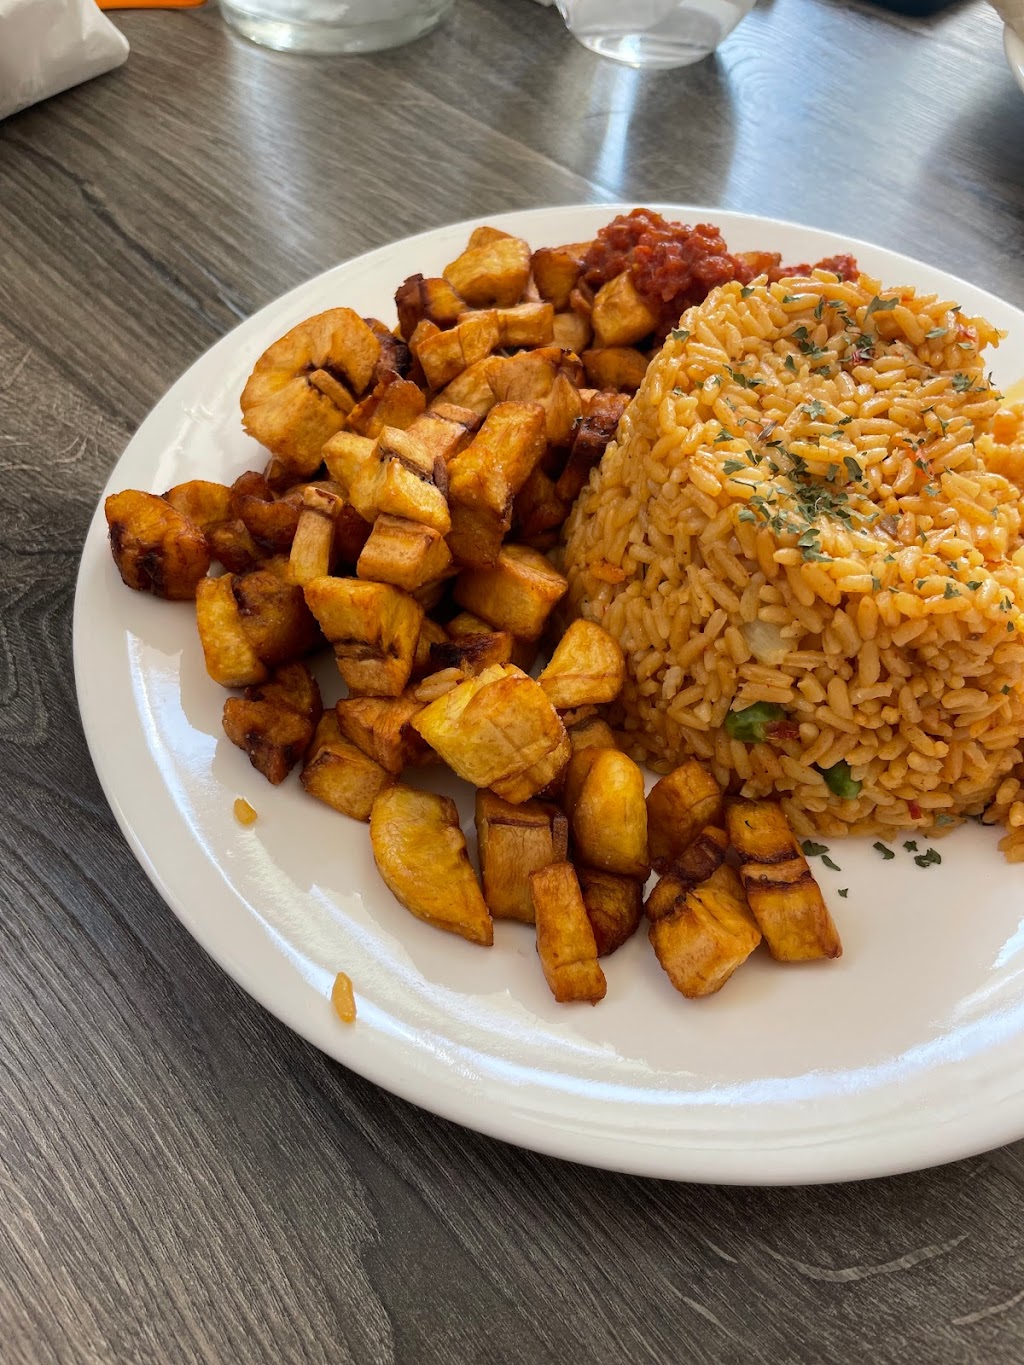 Duro West African Cuisine | 9 College St, South Hadley, MA 01075 | Phone: (413) 322-0687